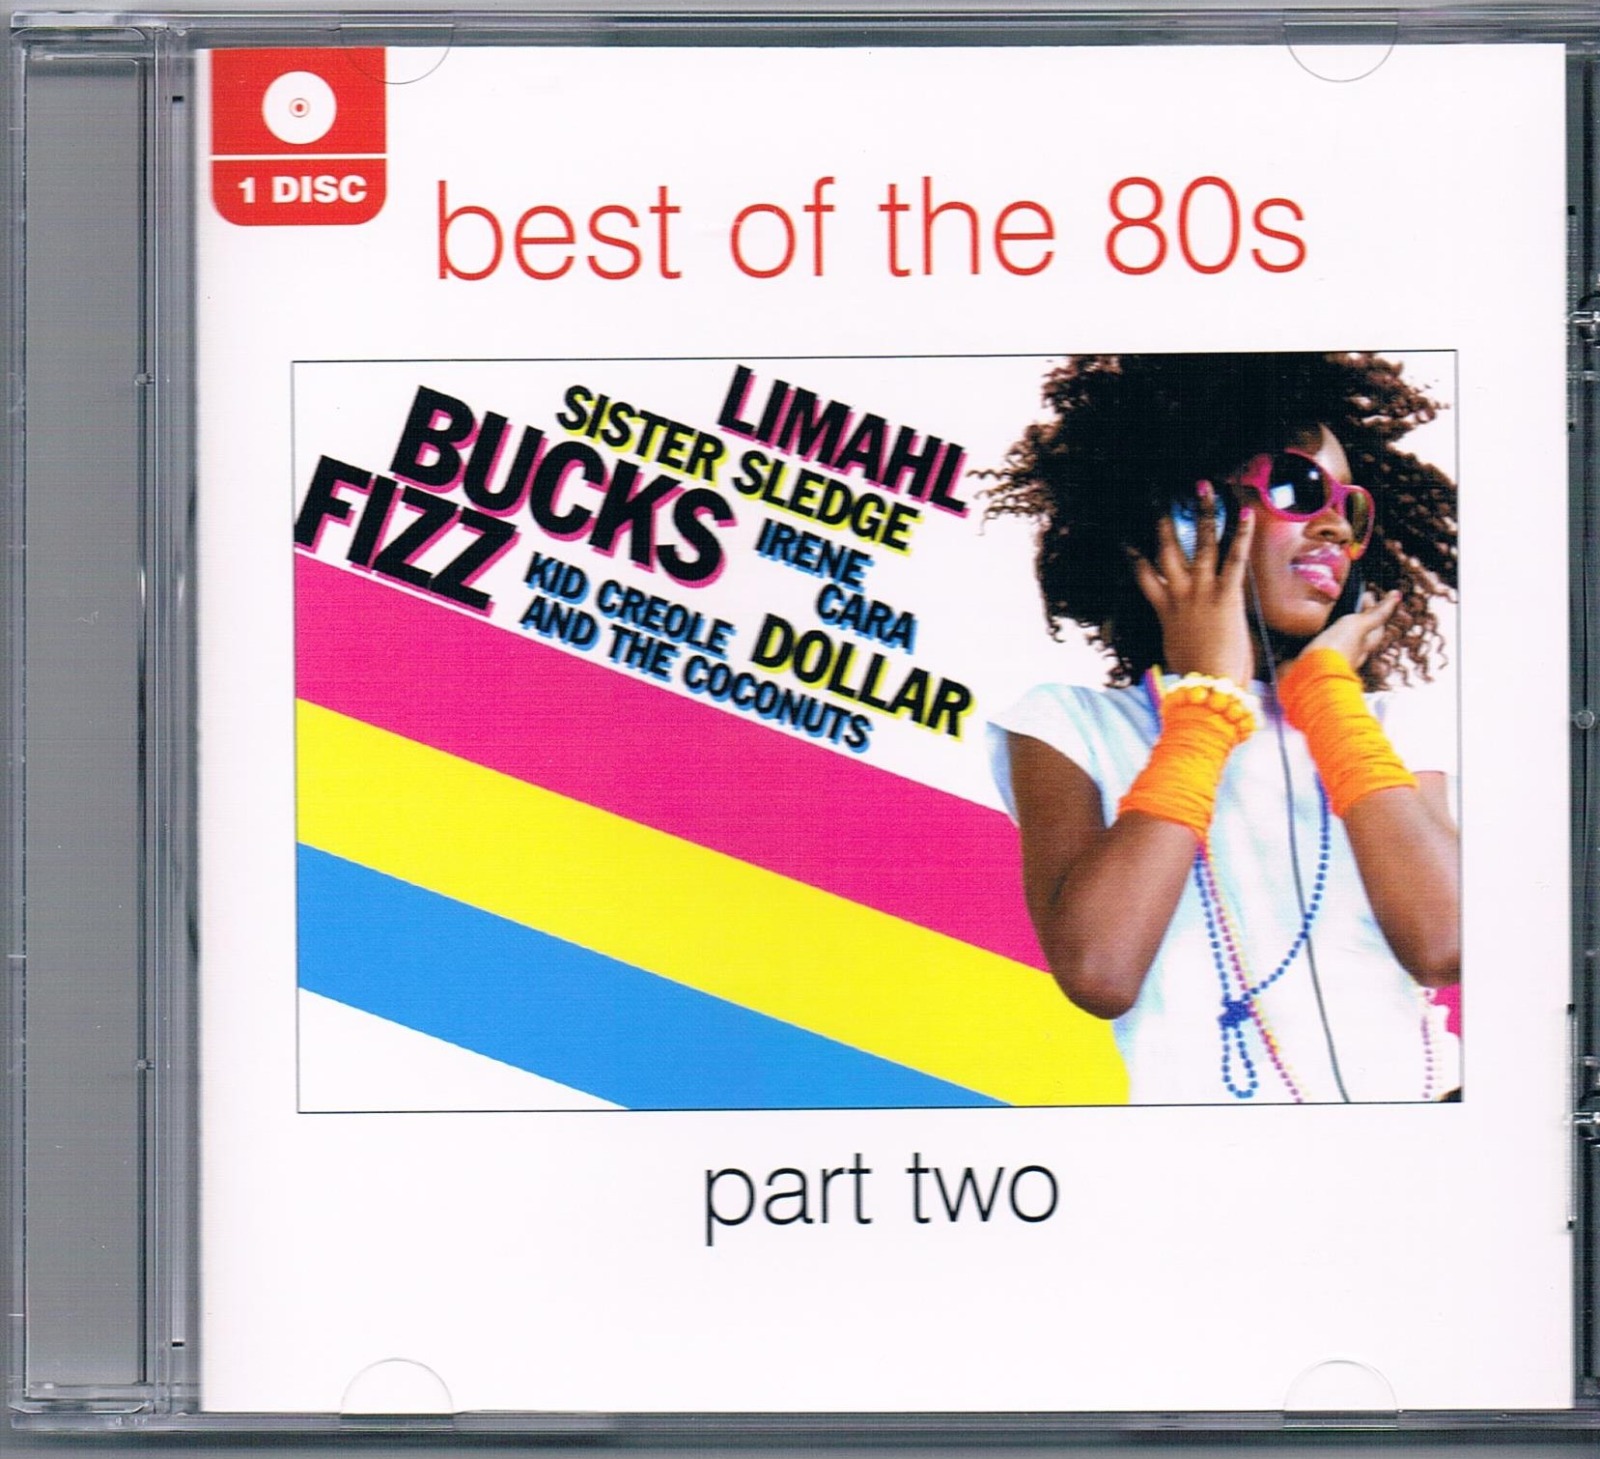 Best of the 80s - part two - CD